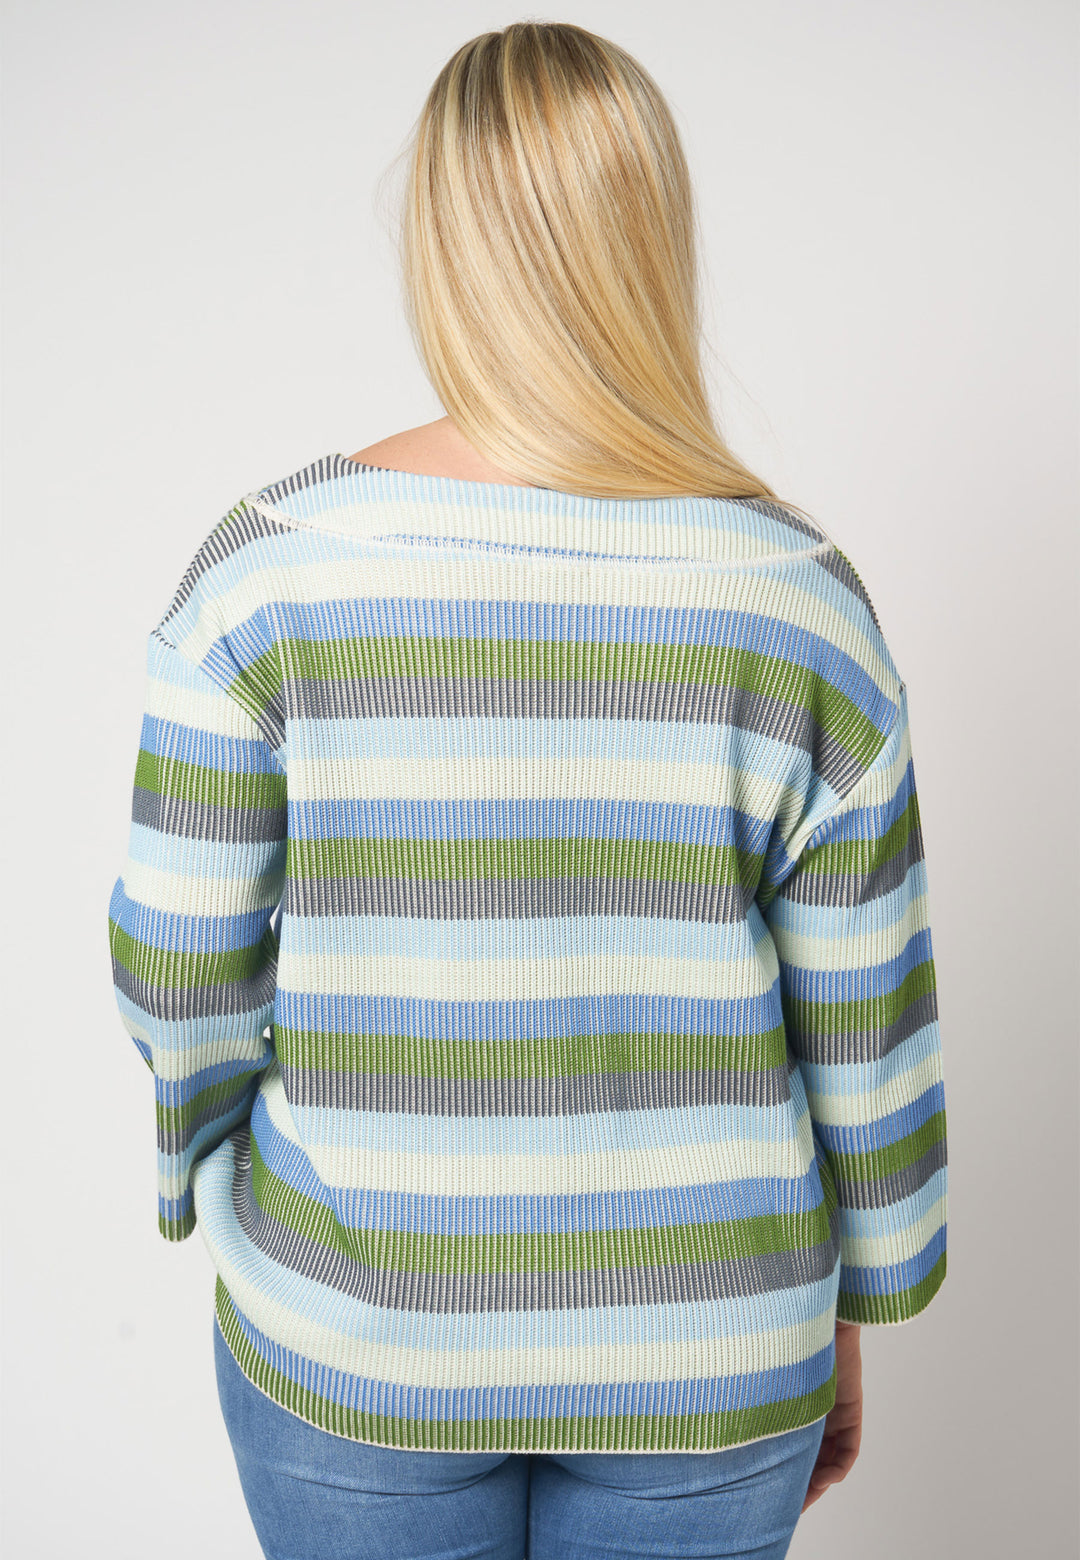 Lind Hilde Knit Pullover 465 Multicolour green